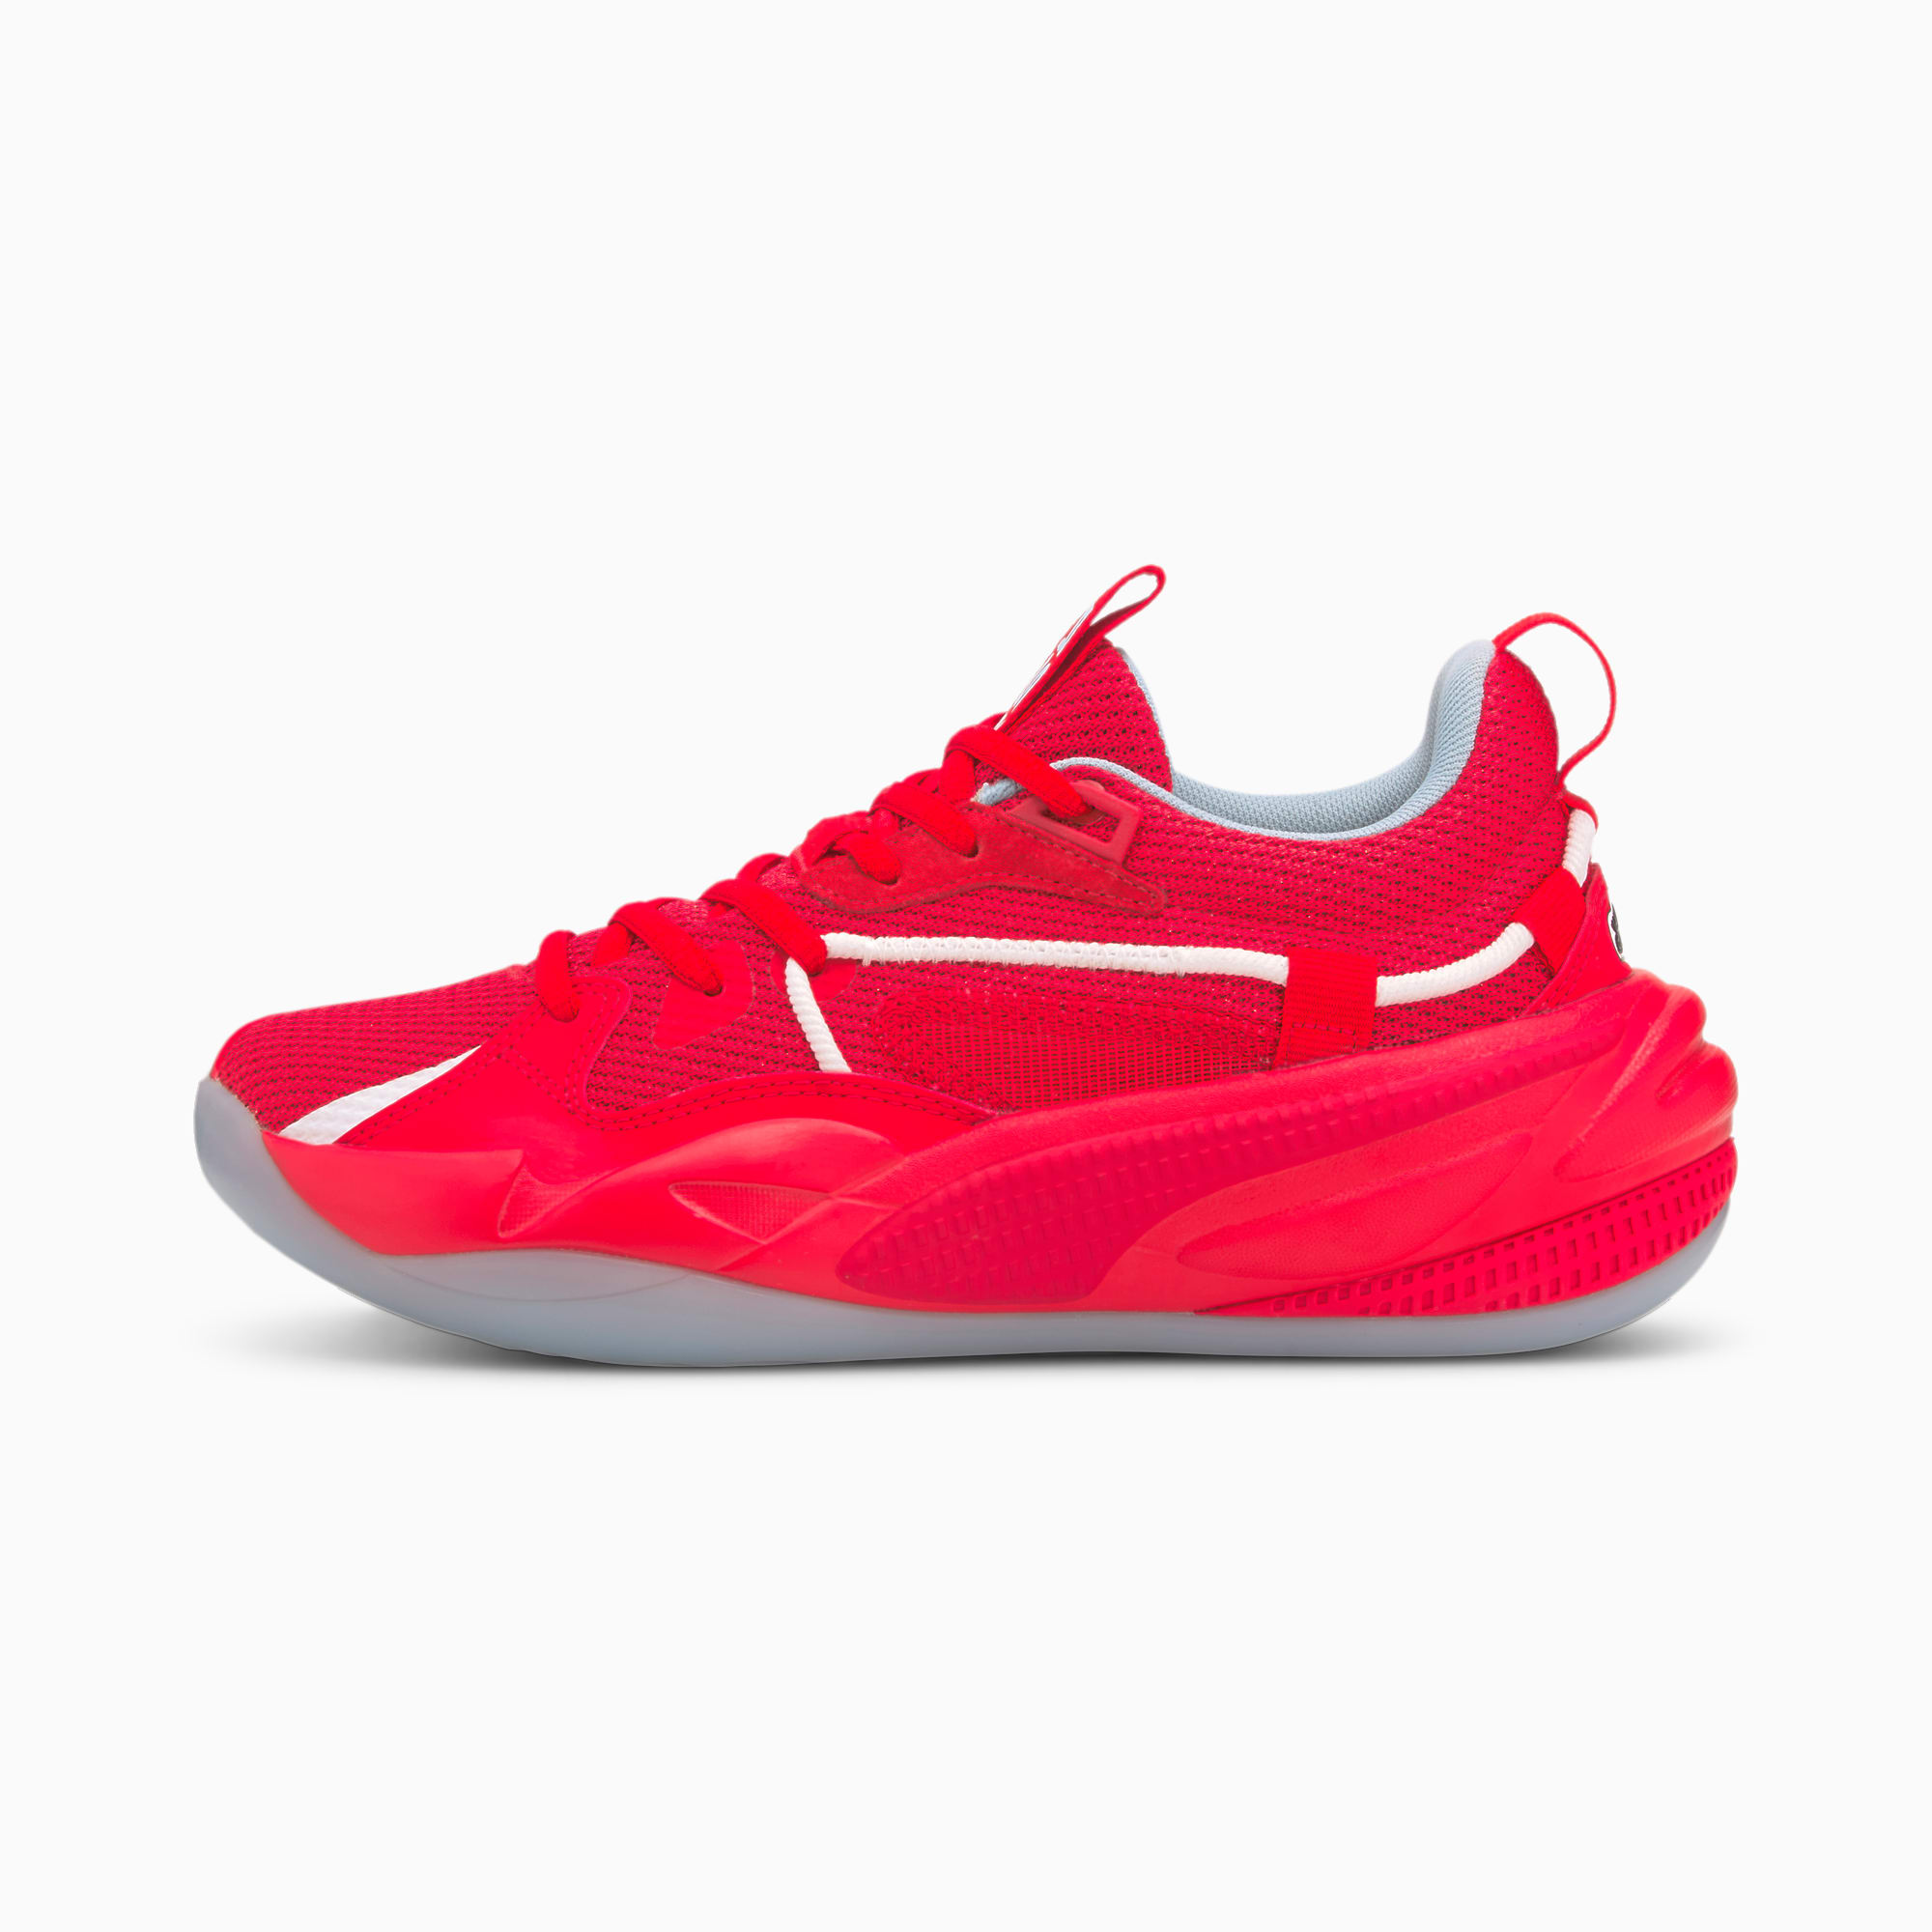 PUMA Chaussure de basket RS-Dreamer Blood, Sweat and Tears Youth pour Enfant, Rouge, Taille 35.5, Ch